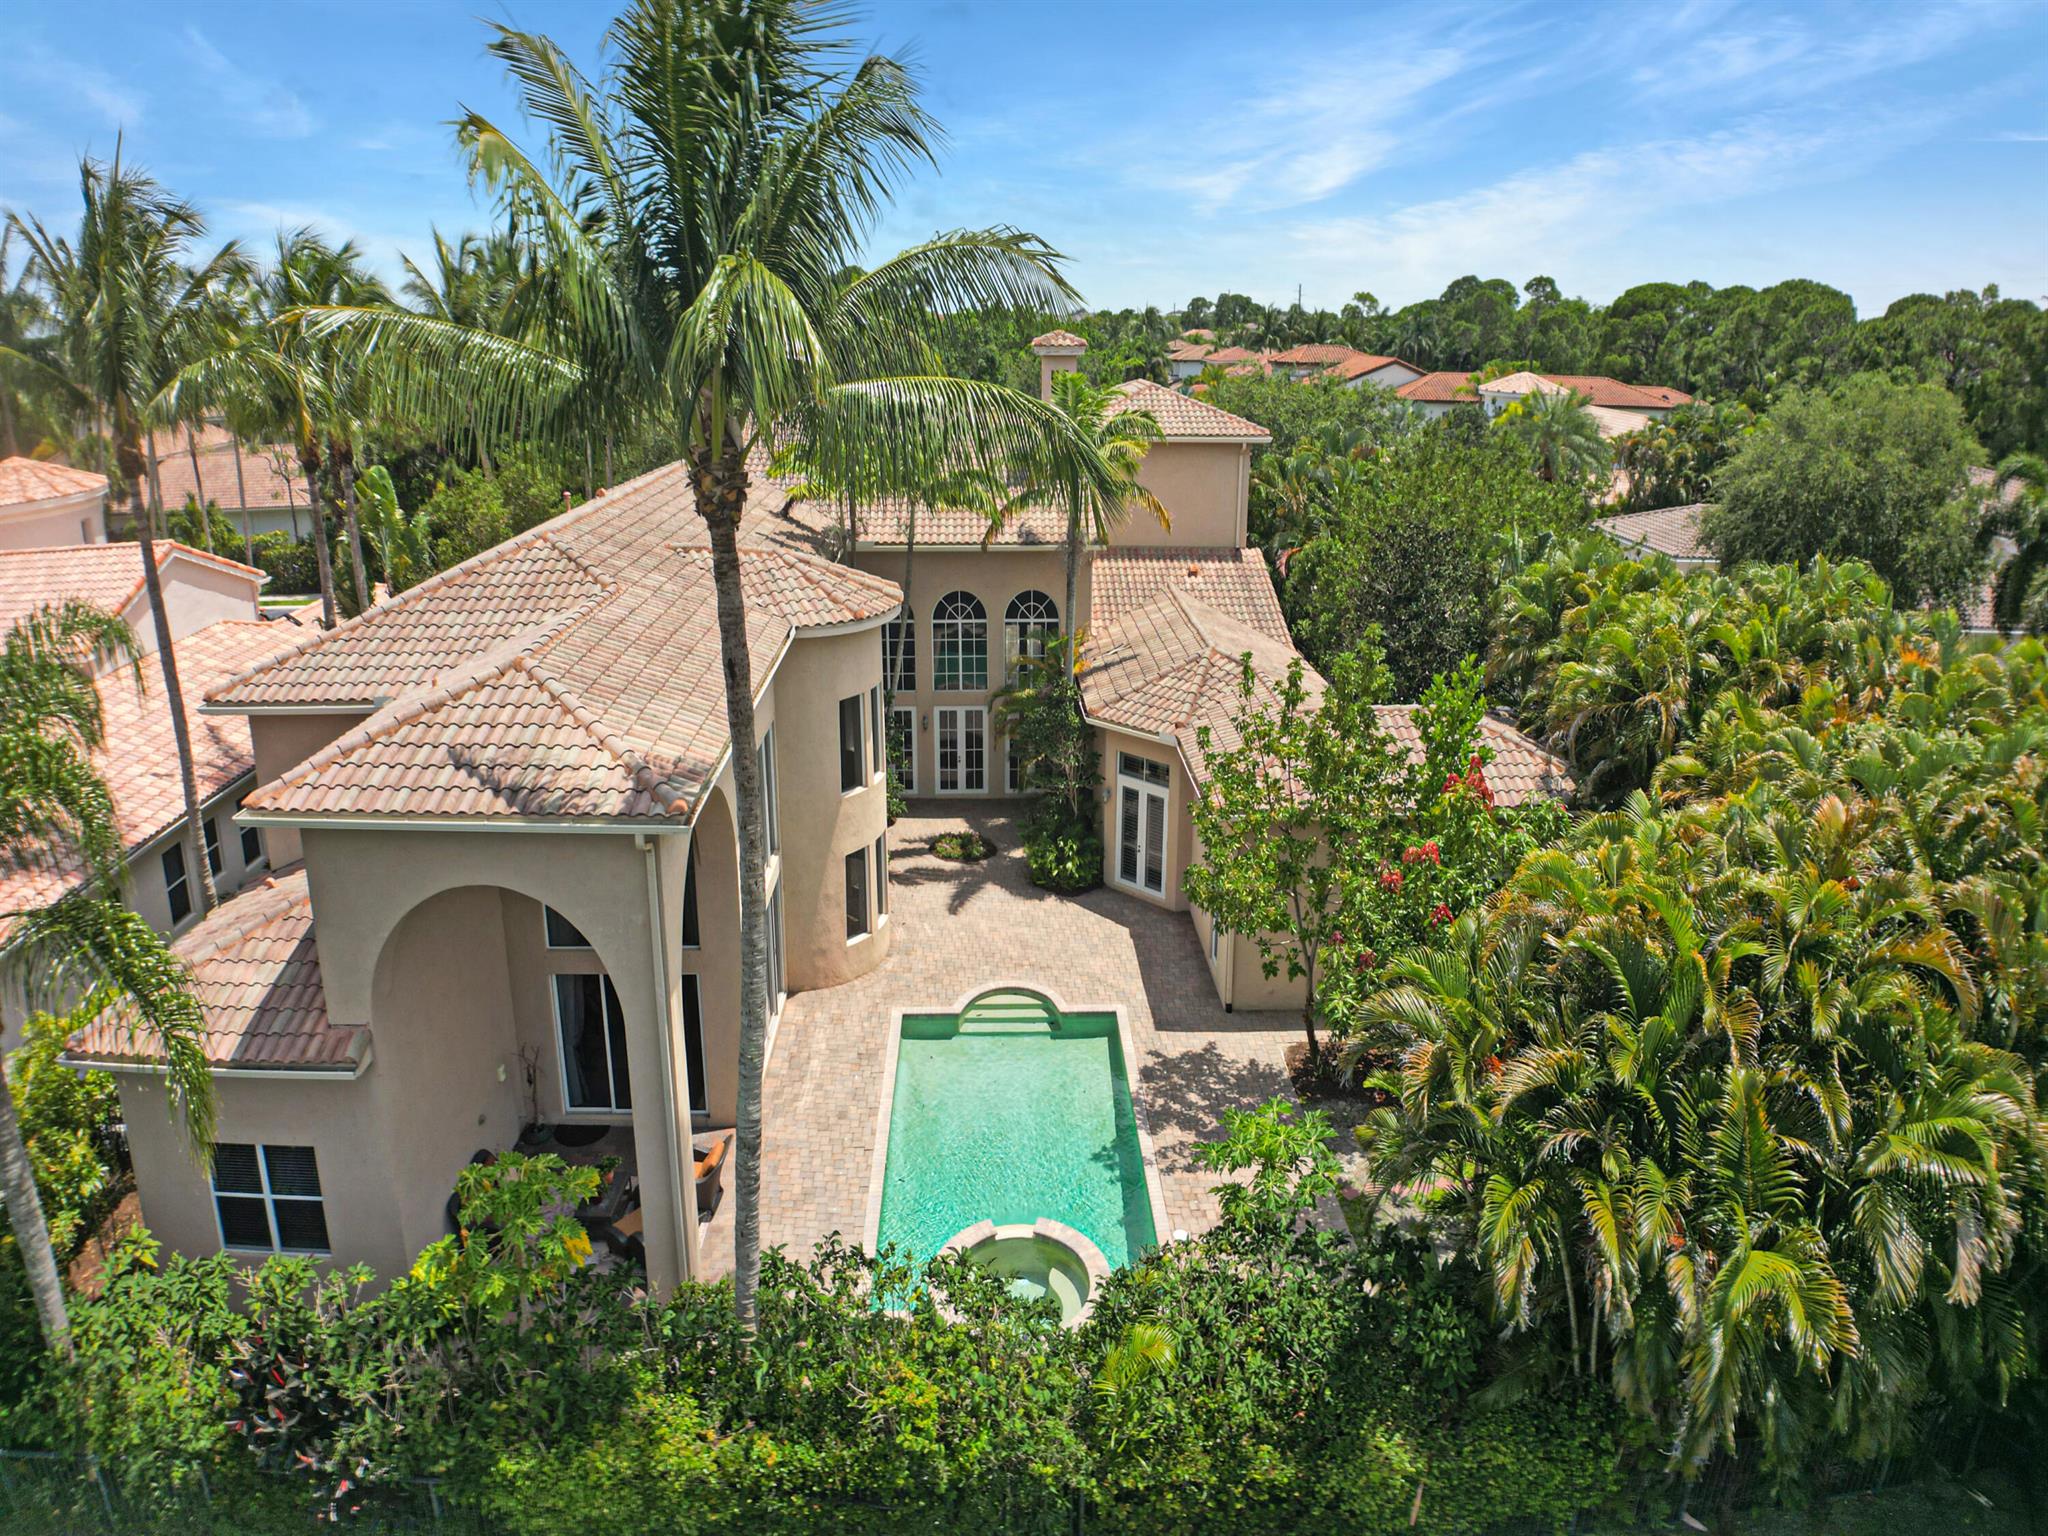 This stunning luxury lakefront pool home, located in the heart of Palm Beach Gardens, is a shining example of San Michele's finest properties. Nestled on a quiet street, the Valdarna model boasts 6,346 square feet of air-conditioned space, featuring 6 spacious bedrooms and 7.5 bathrooms. The floor plan also includes an office, media/playroom, a custom-added nursery room behind the prime suite, a loft, and a wet bar. The spa and pool in the courtyard overlook a serene lake, creating a peaceful oasis for residents.  The gourmet kitchen is a chef's dream, with a 8 burner range, granite countertops, a chef's island, a butler's prep area with a warmer, and a solid wood walk-in pantry. The prime suite is its own oasis.  Walking into the French doors, there is a mini bar with a refrigerator  , his-and-her walk-in closets. Built by Gordon Builders in 2006, this home exudes elegance and functionality with a fireplace, travertine floors, a black wrought-iron spiral staircase that showcases the magnificent 21.5-foot high cathedral ceiling, triple French doors, arched windows brightening up the living room, plantation shutters, custom draperies, and an ample yard with lush landscaping filled with avocado, mango, and papaya trees in the garden, and a four-car garage with an electric charger is located on a governor's drive.  San Michele is a private  24/7 manned gated community that boasts 90 large estate homes, known for its beauty and quality construction, and this is the largest model available. The community offers low HOA dues with the benefits of amenities for an active lifestyle, including Har-Tru clay tennis courts, a community swimming pool, a fitness center, and a well-appointed clubhouse. Conveniently located near shopping, dining, schools, the beach, and the airport, this home's location is ideal. With top-rated schools and just over 2 miles from the beach, this is the perfect place to call home. Book a private viewing today and experience luxury living at its finest. You will not find this large size estate in most ideal location with NO equity membership!  THIS HOME IS PRICED TO SELL!